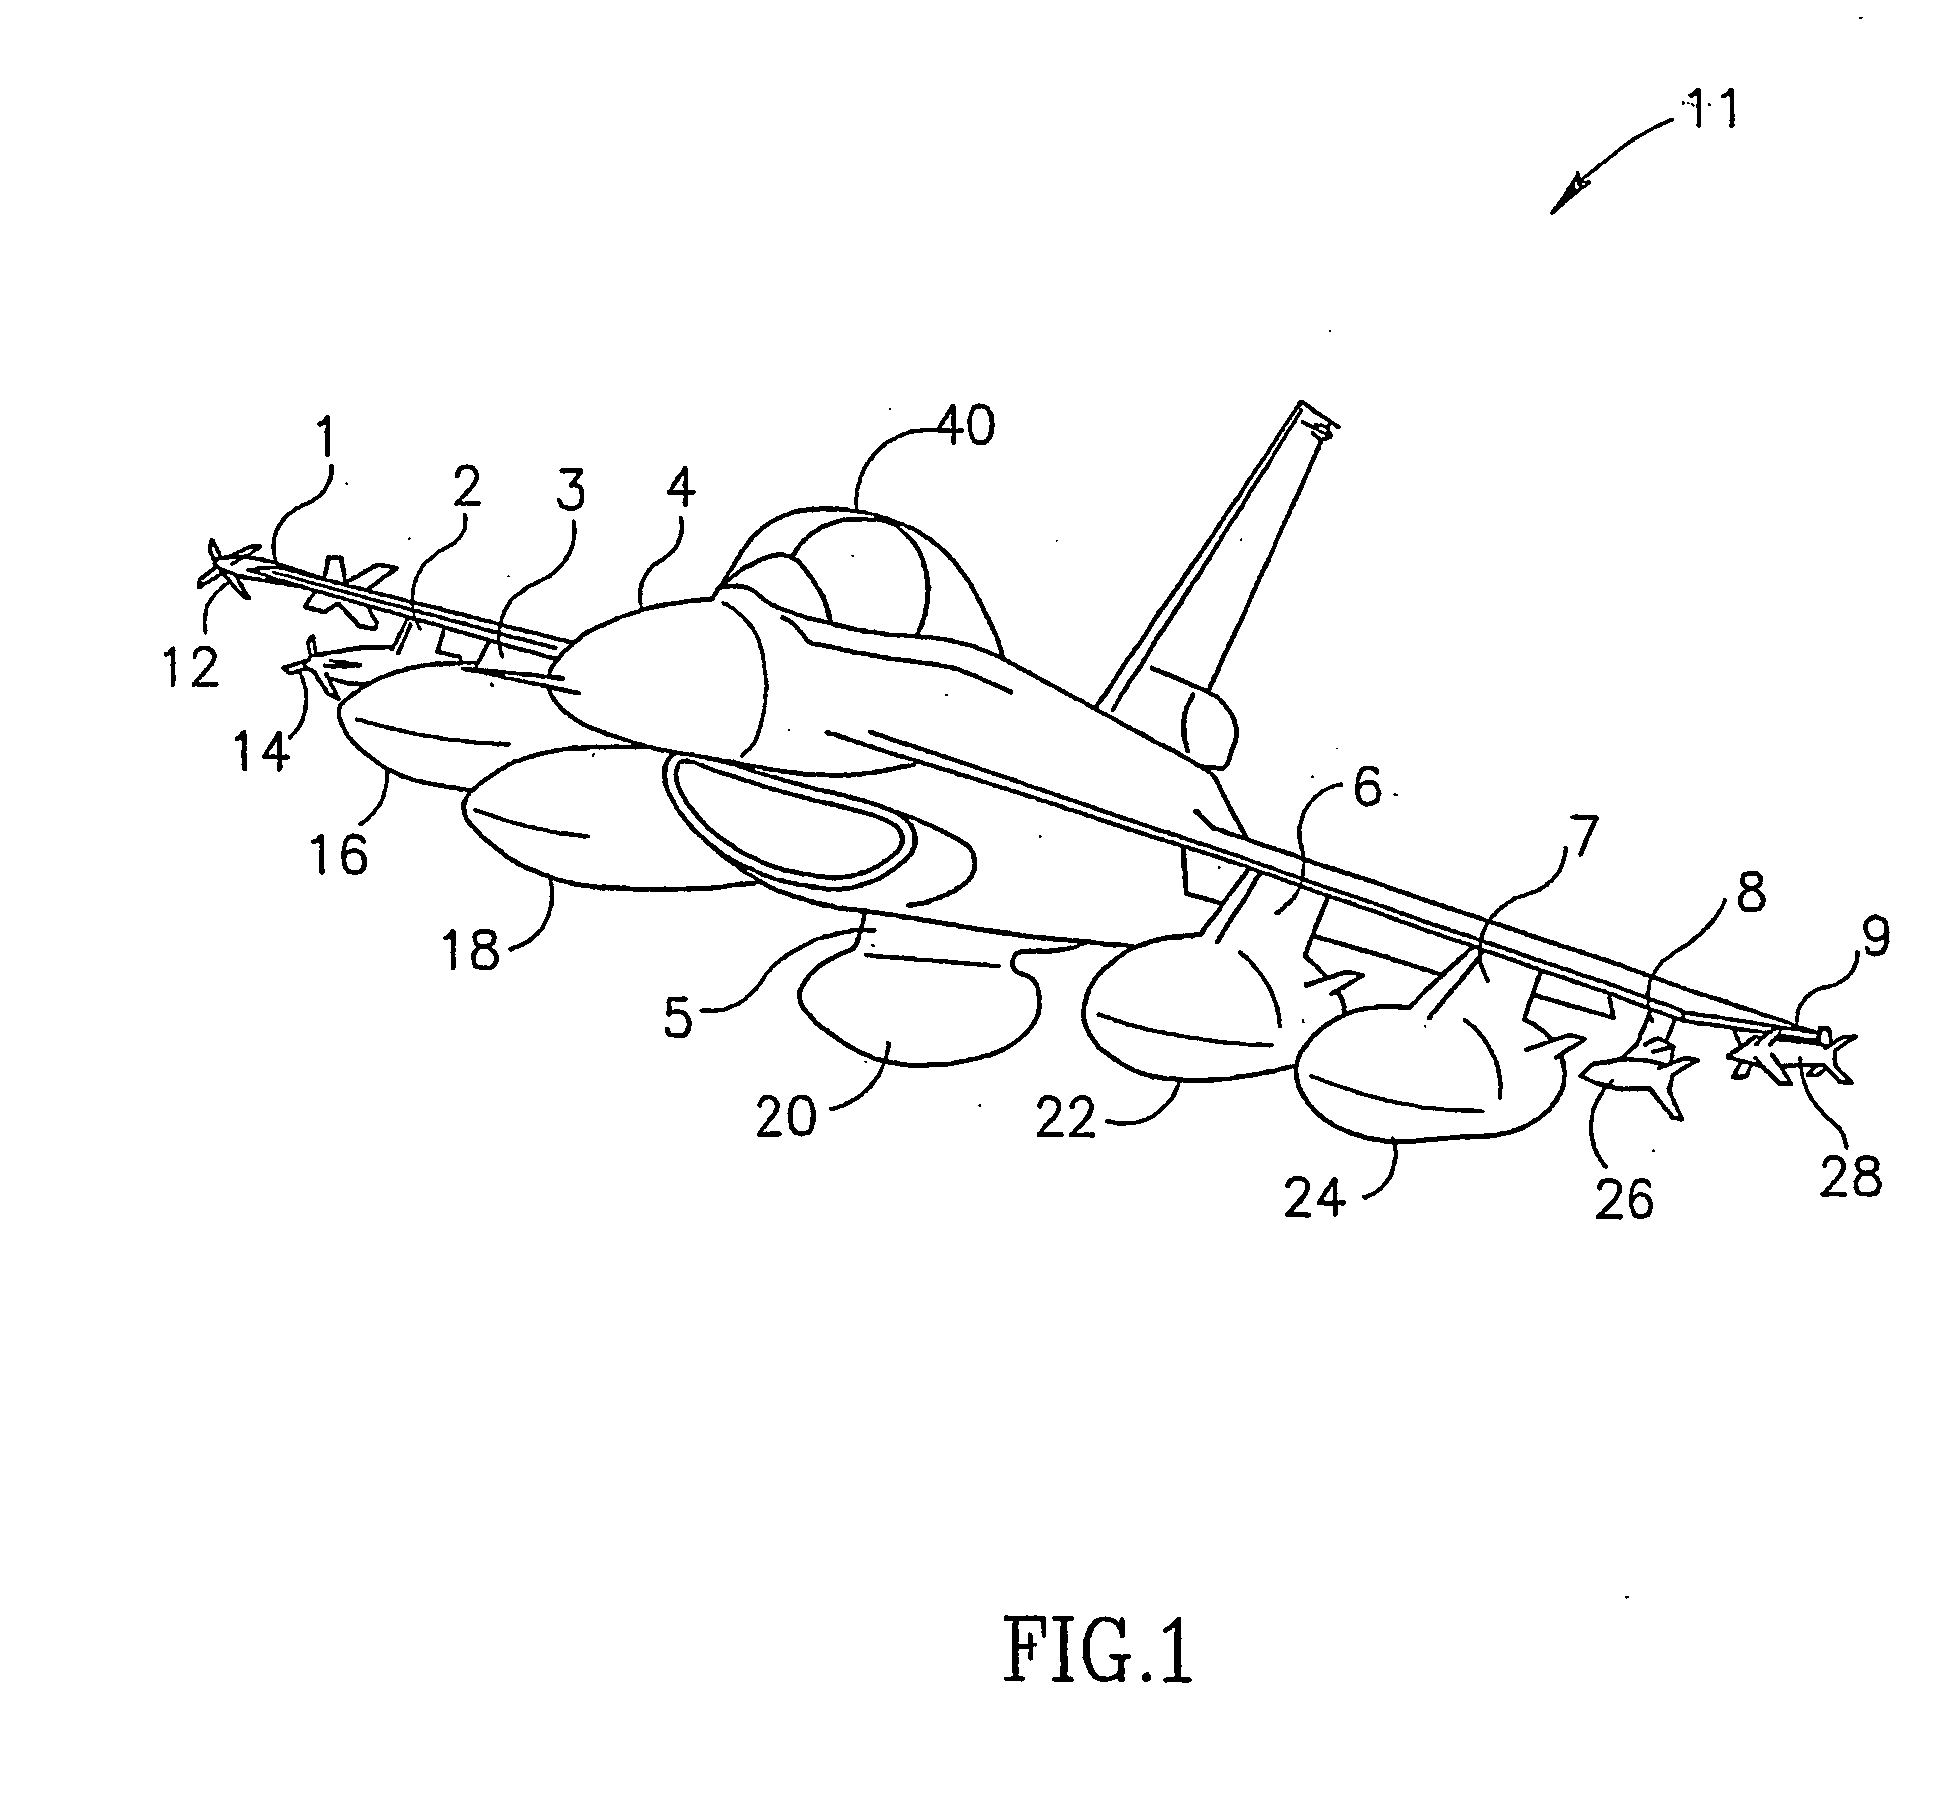 System and method for enhancing the payload capacity, carriage efficiency, and adaptive flexibility of external stores mounted on an aerial vehicle